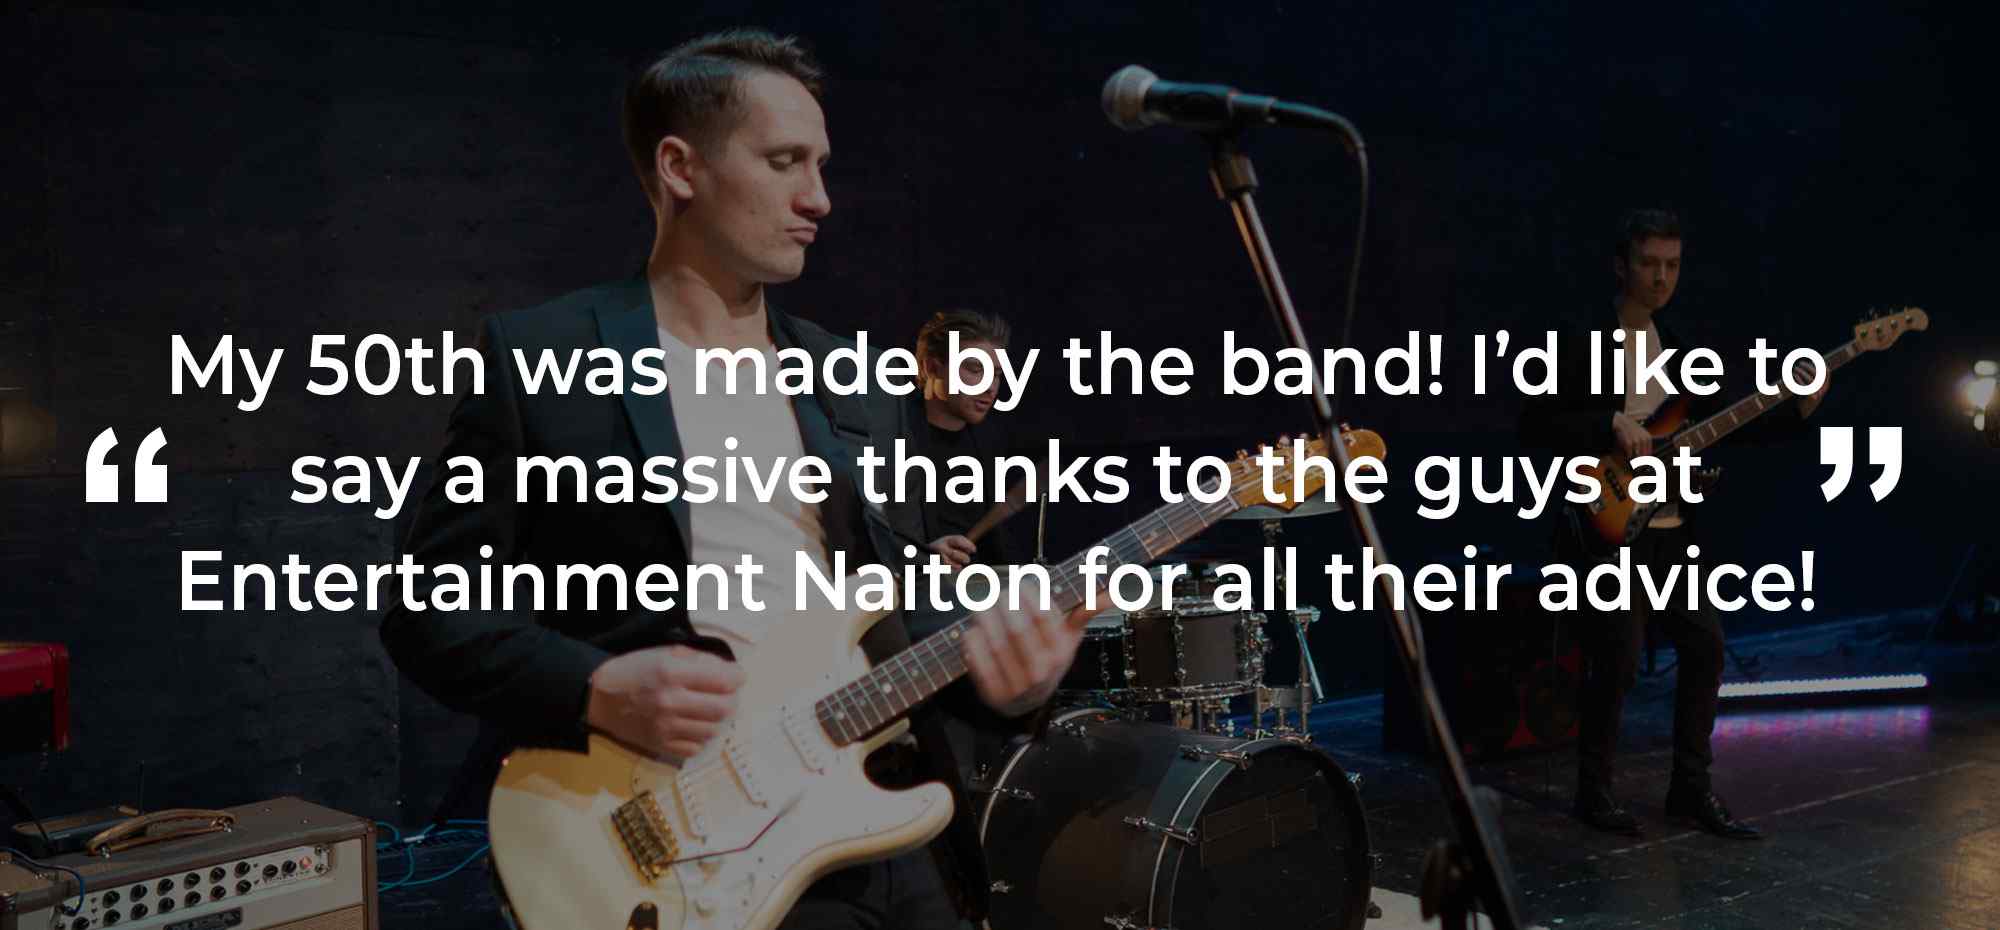 Client Review of a Party Band Monmouthshire